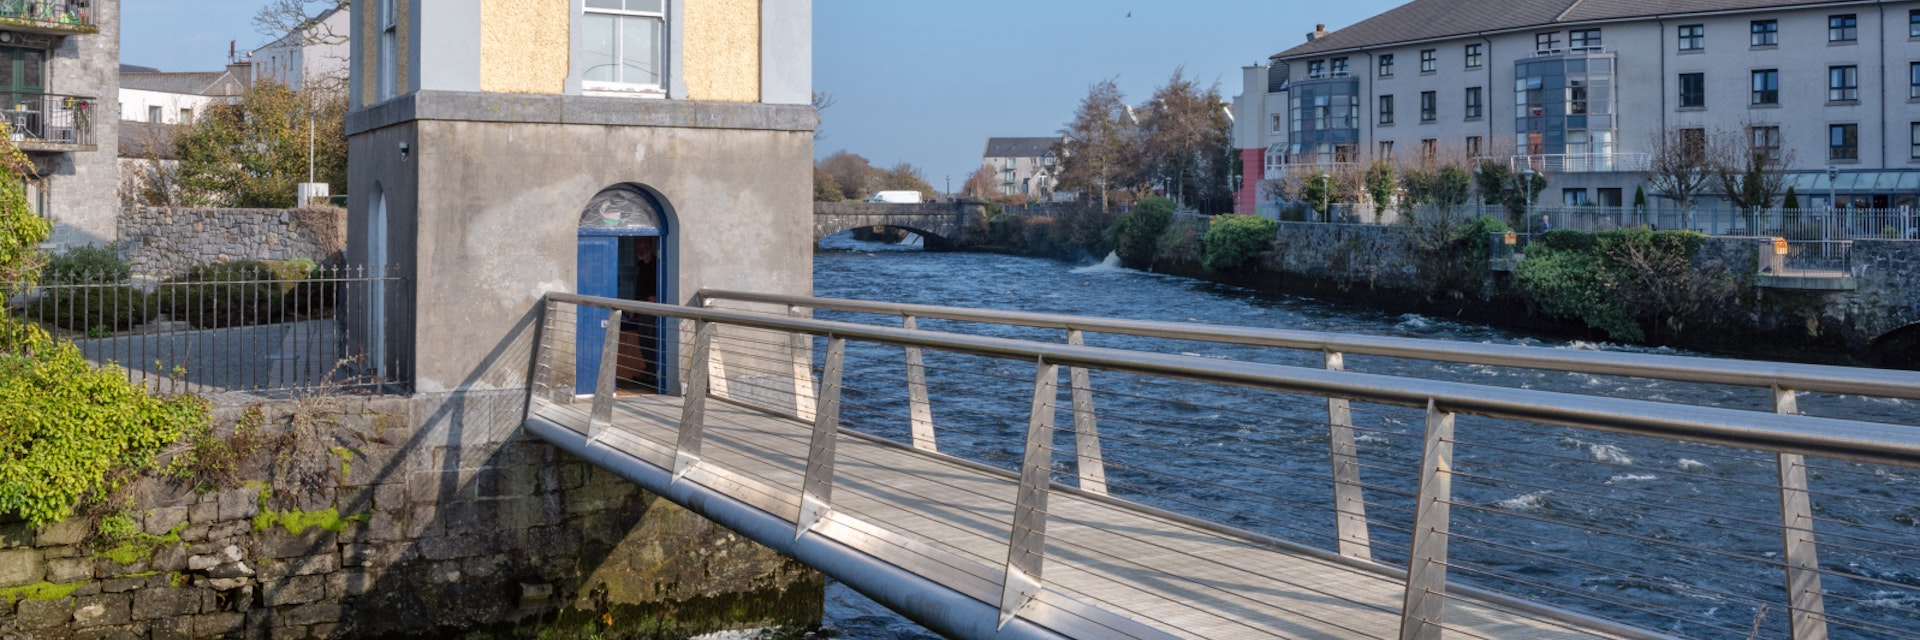 The Fisheries Watchtower on the River Corrib, Galway City, Ireland.